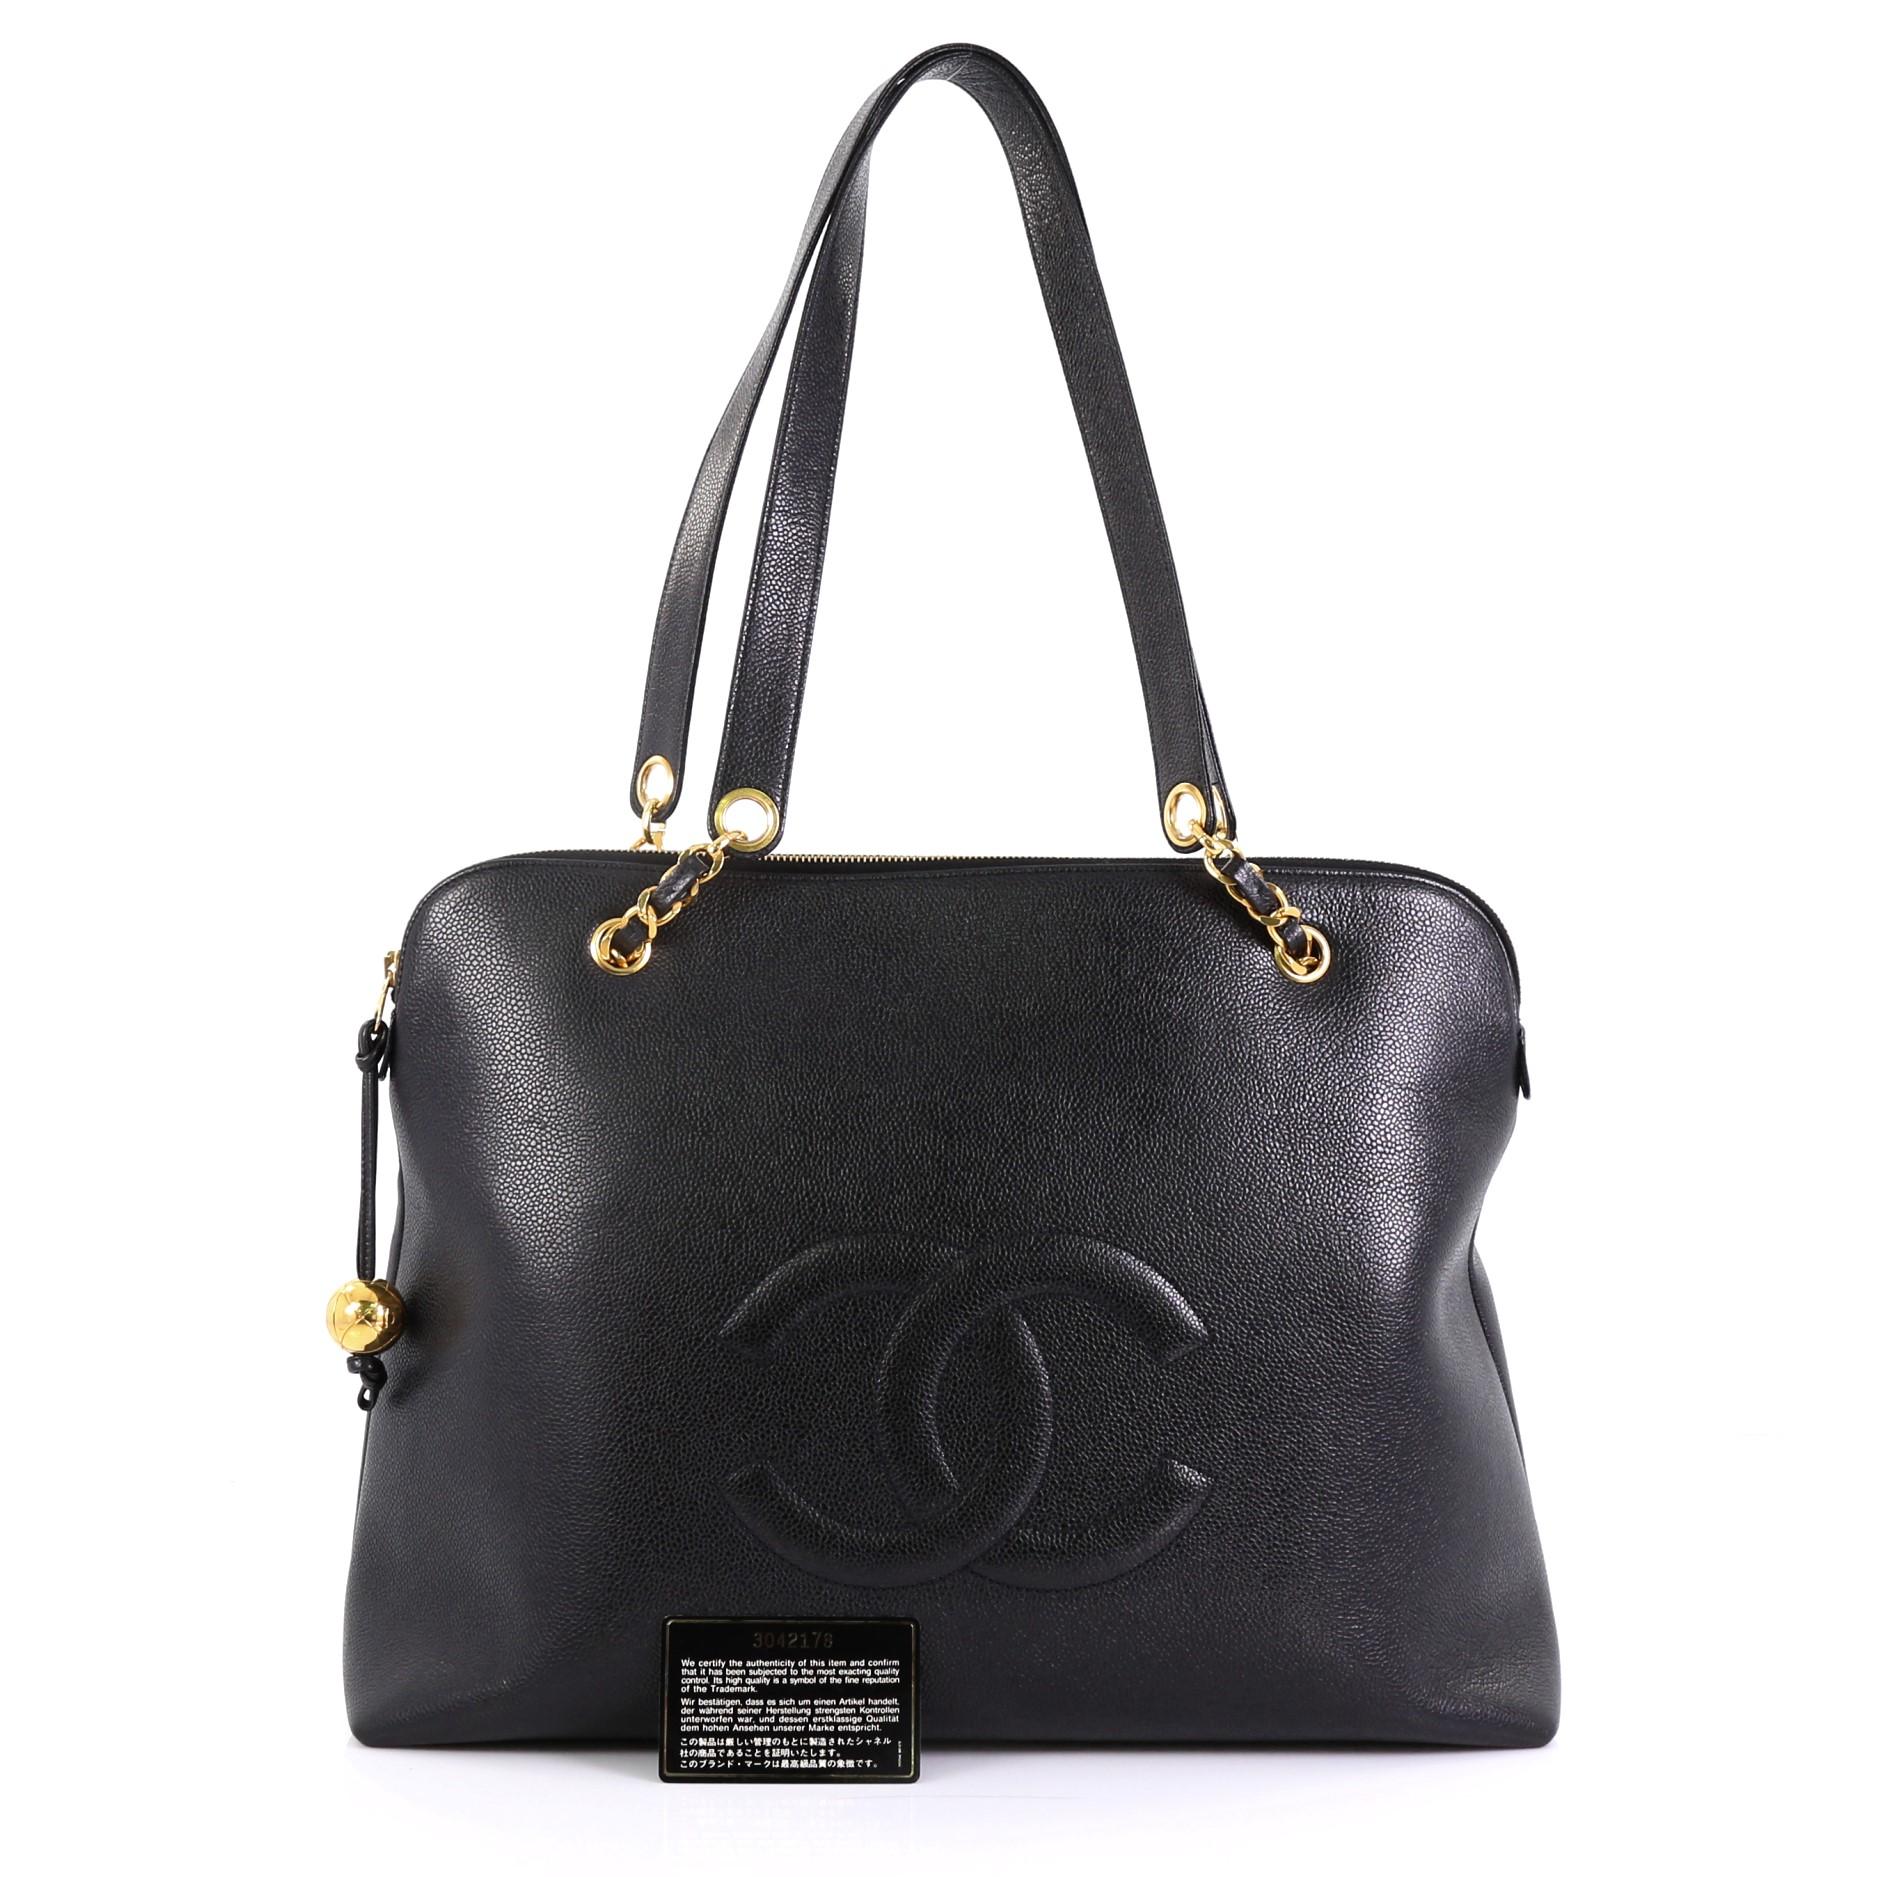 This Chanel Vintage Timeless Zip Tote Caviar Large, crafted from black caviar leather, features woven-in leather chain straps with shoulder pads, CC stitched logo at front, and gold-tone hardware. Its zip closure opens to a black leather interior